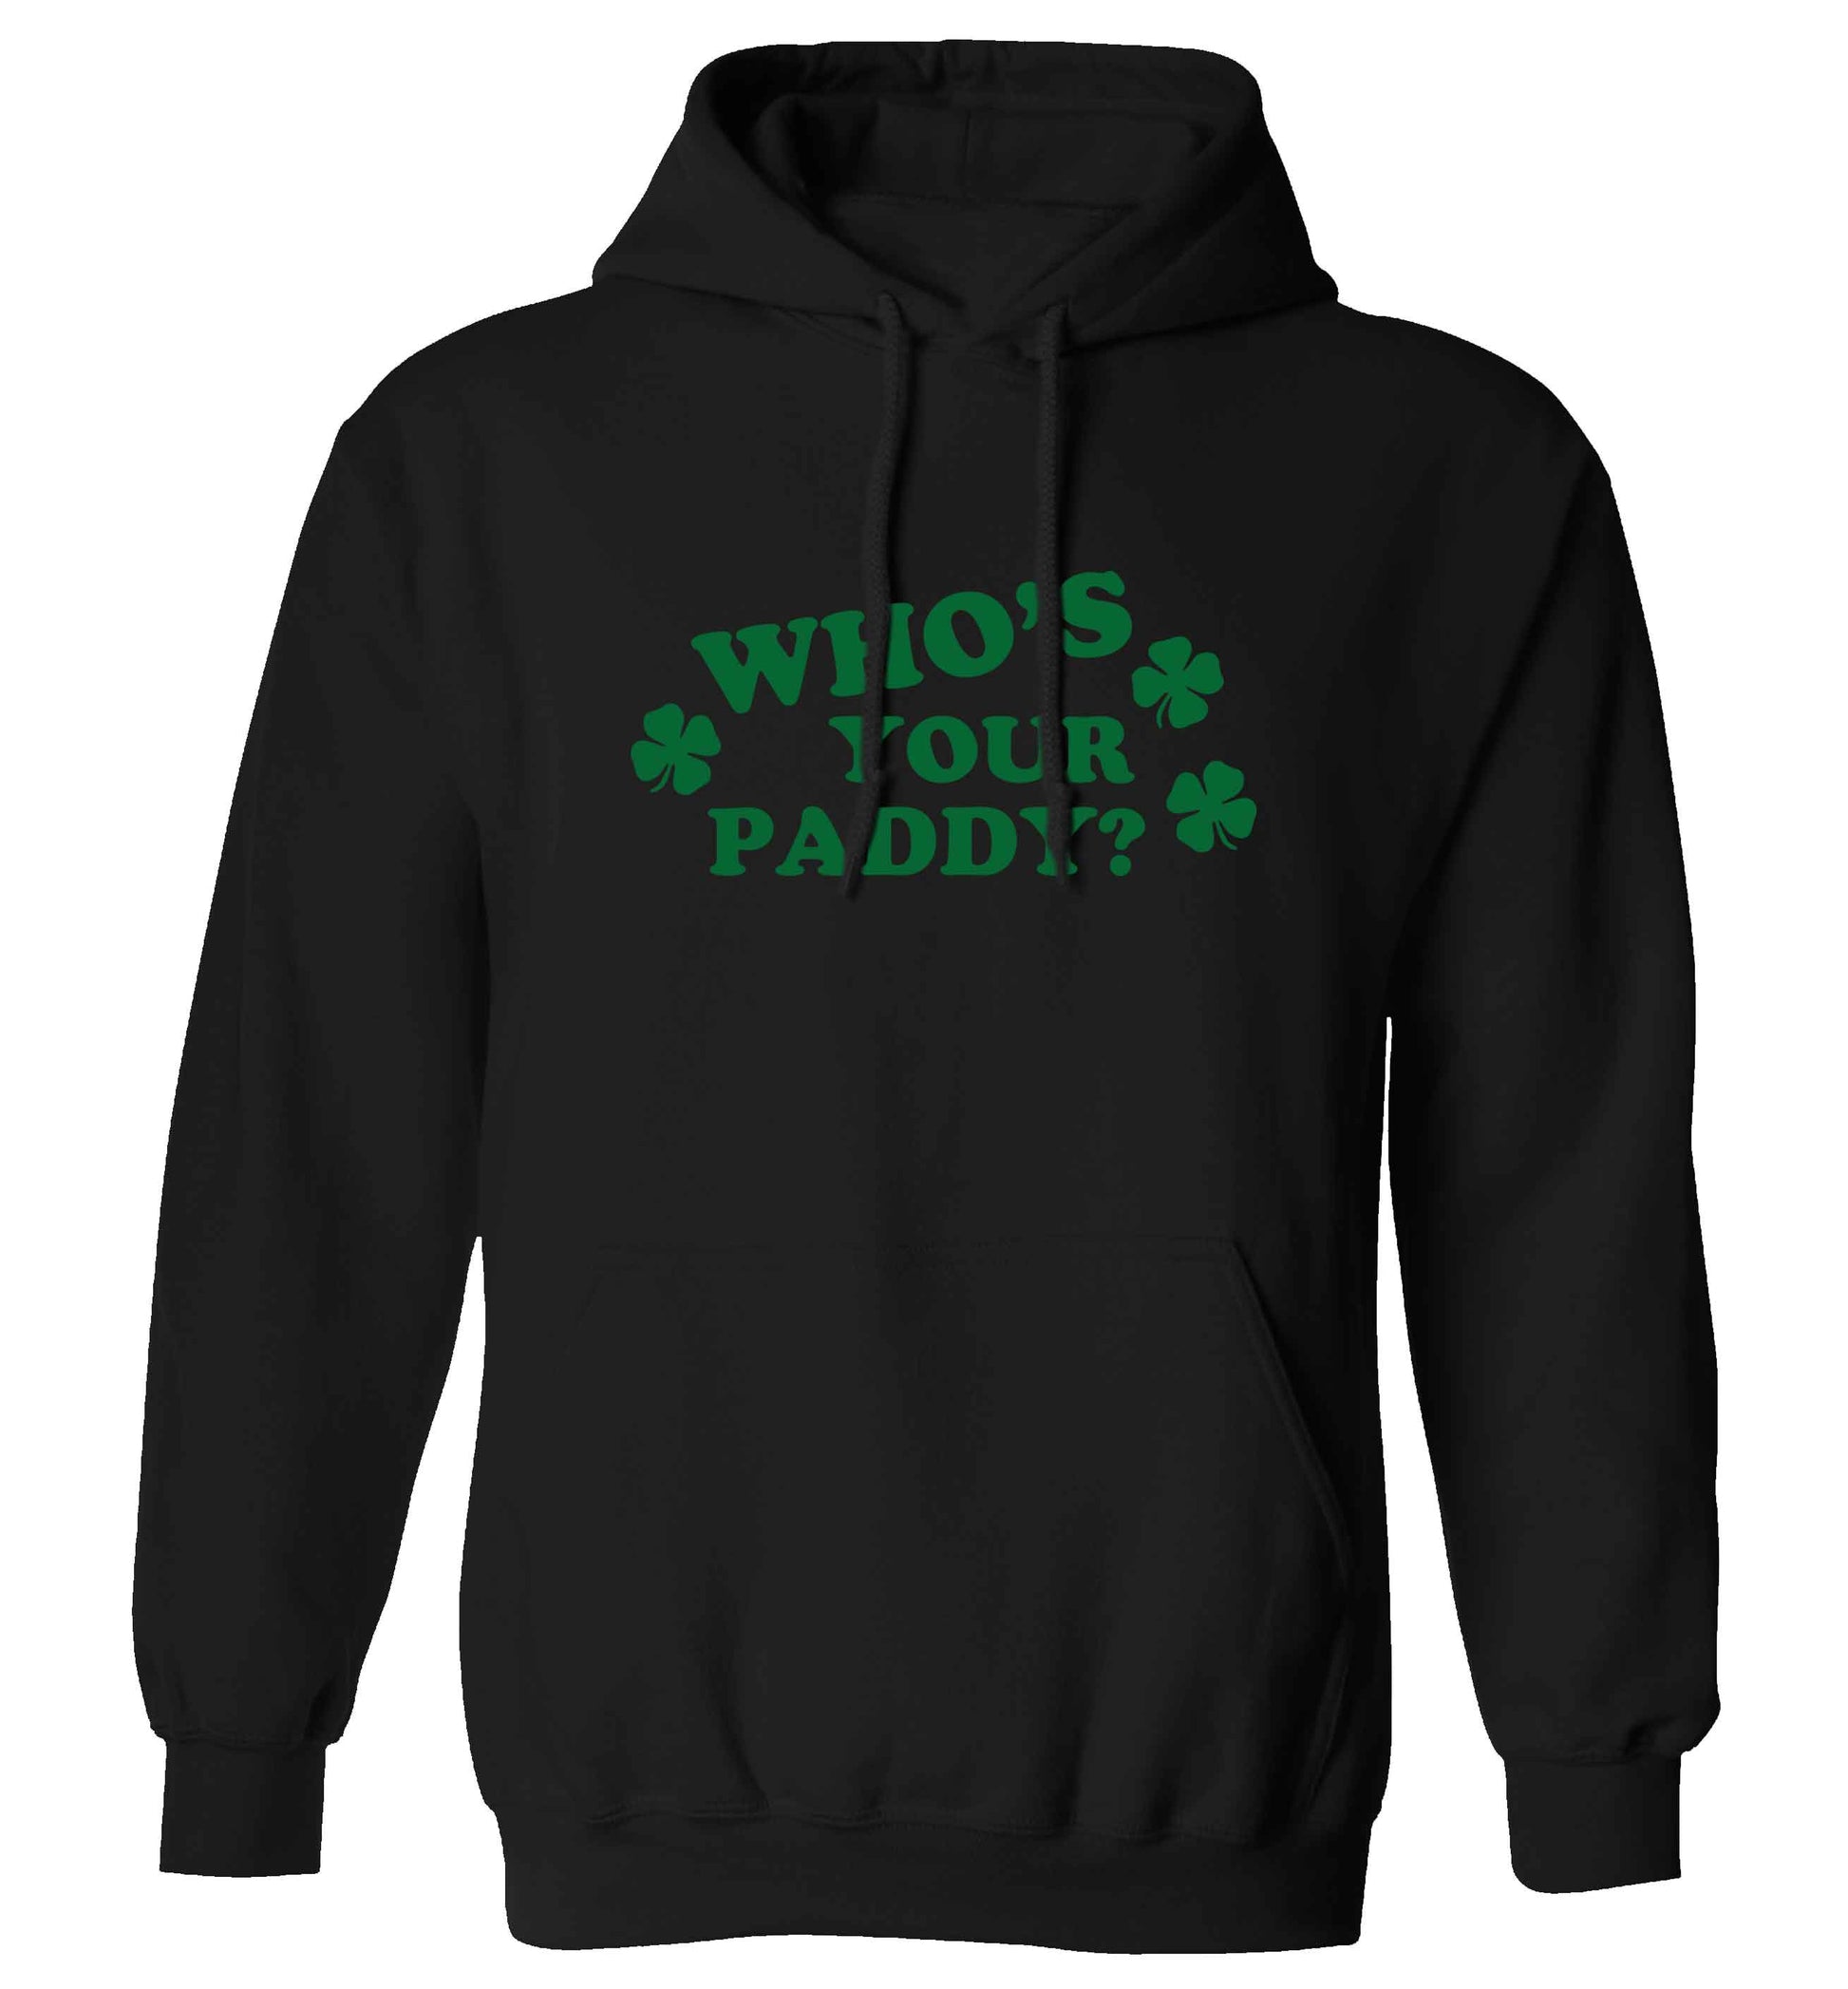 Who's your paddy? adults unisex black hoodie 2XL